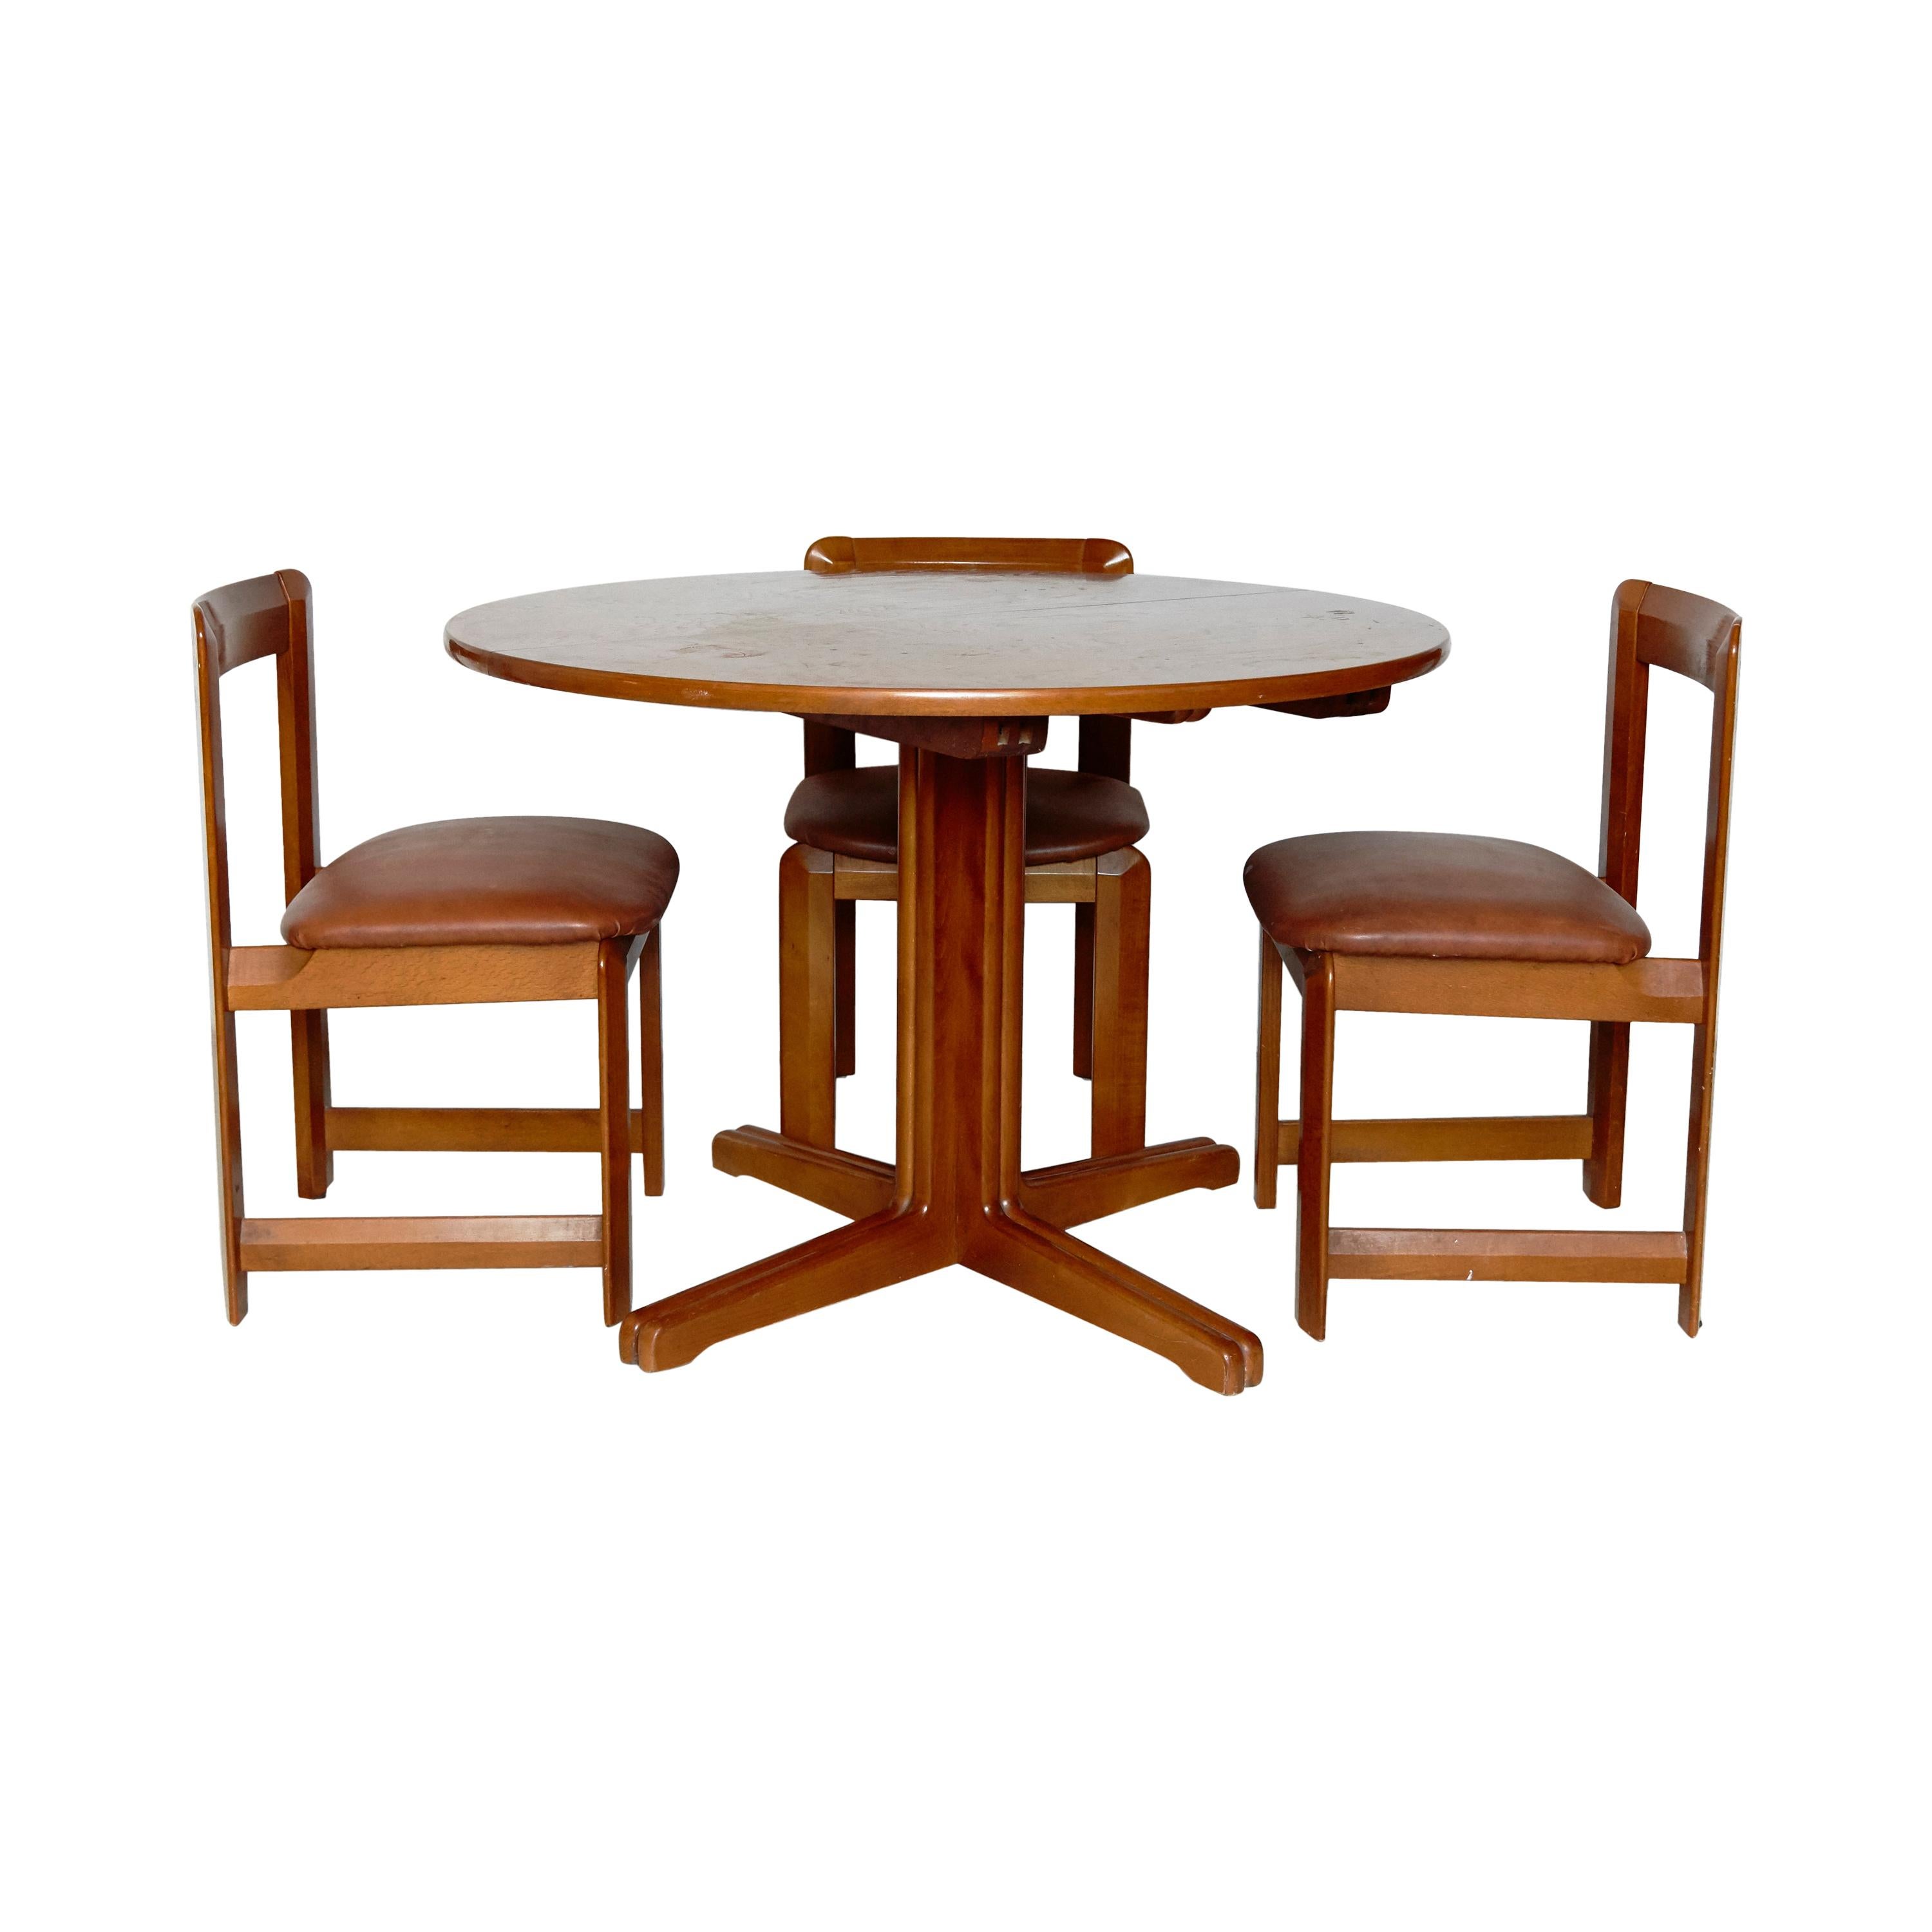 Set of Three Wood Chairs and Dining Table by Guillaumes, circa 1960